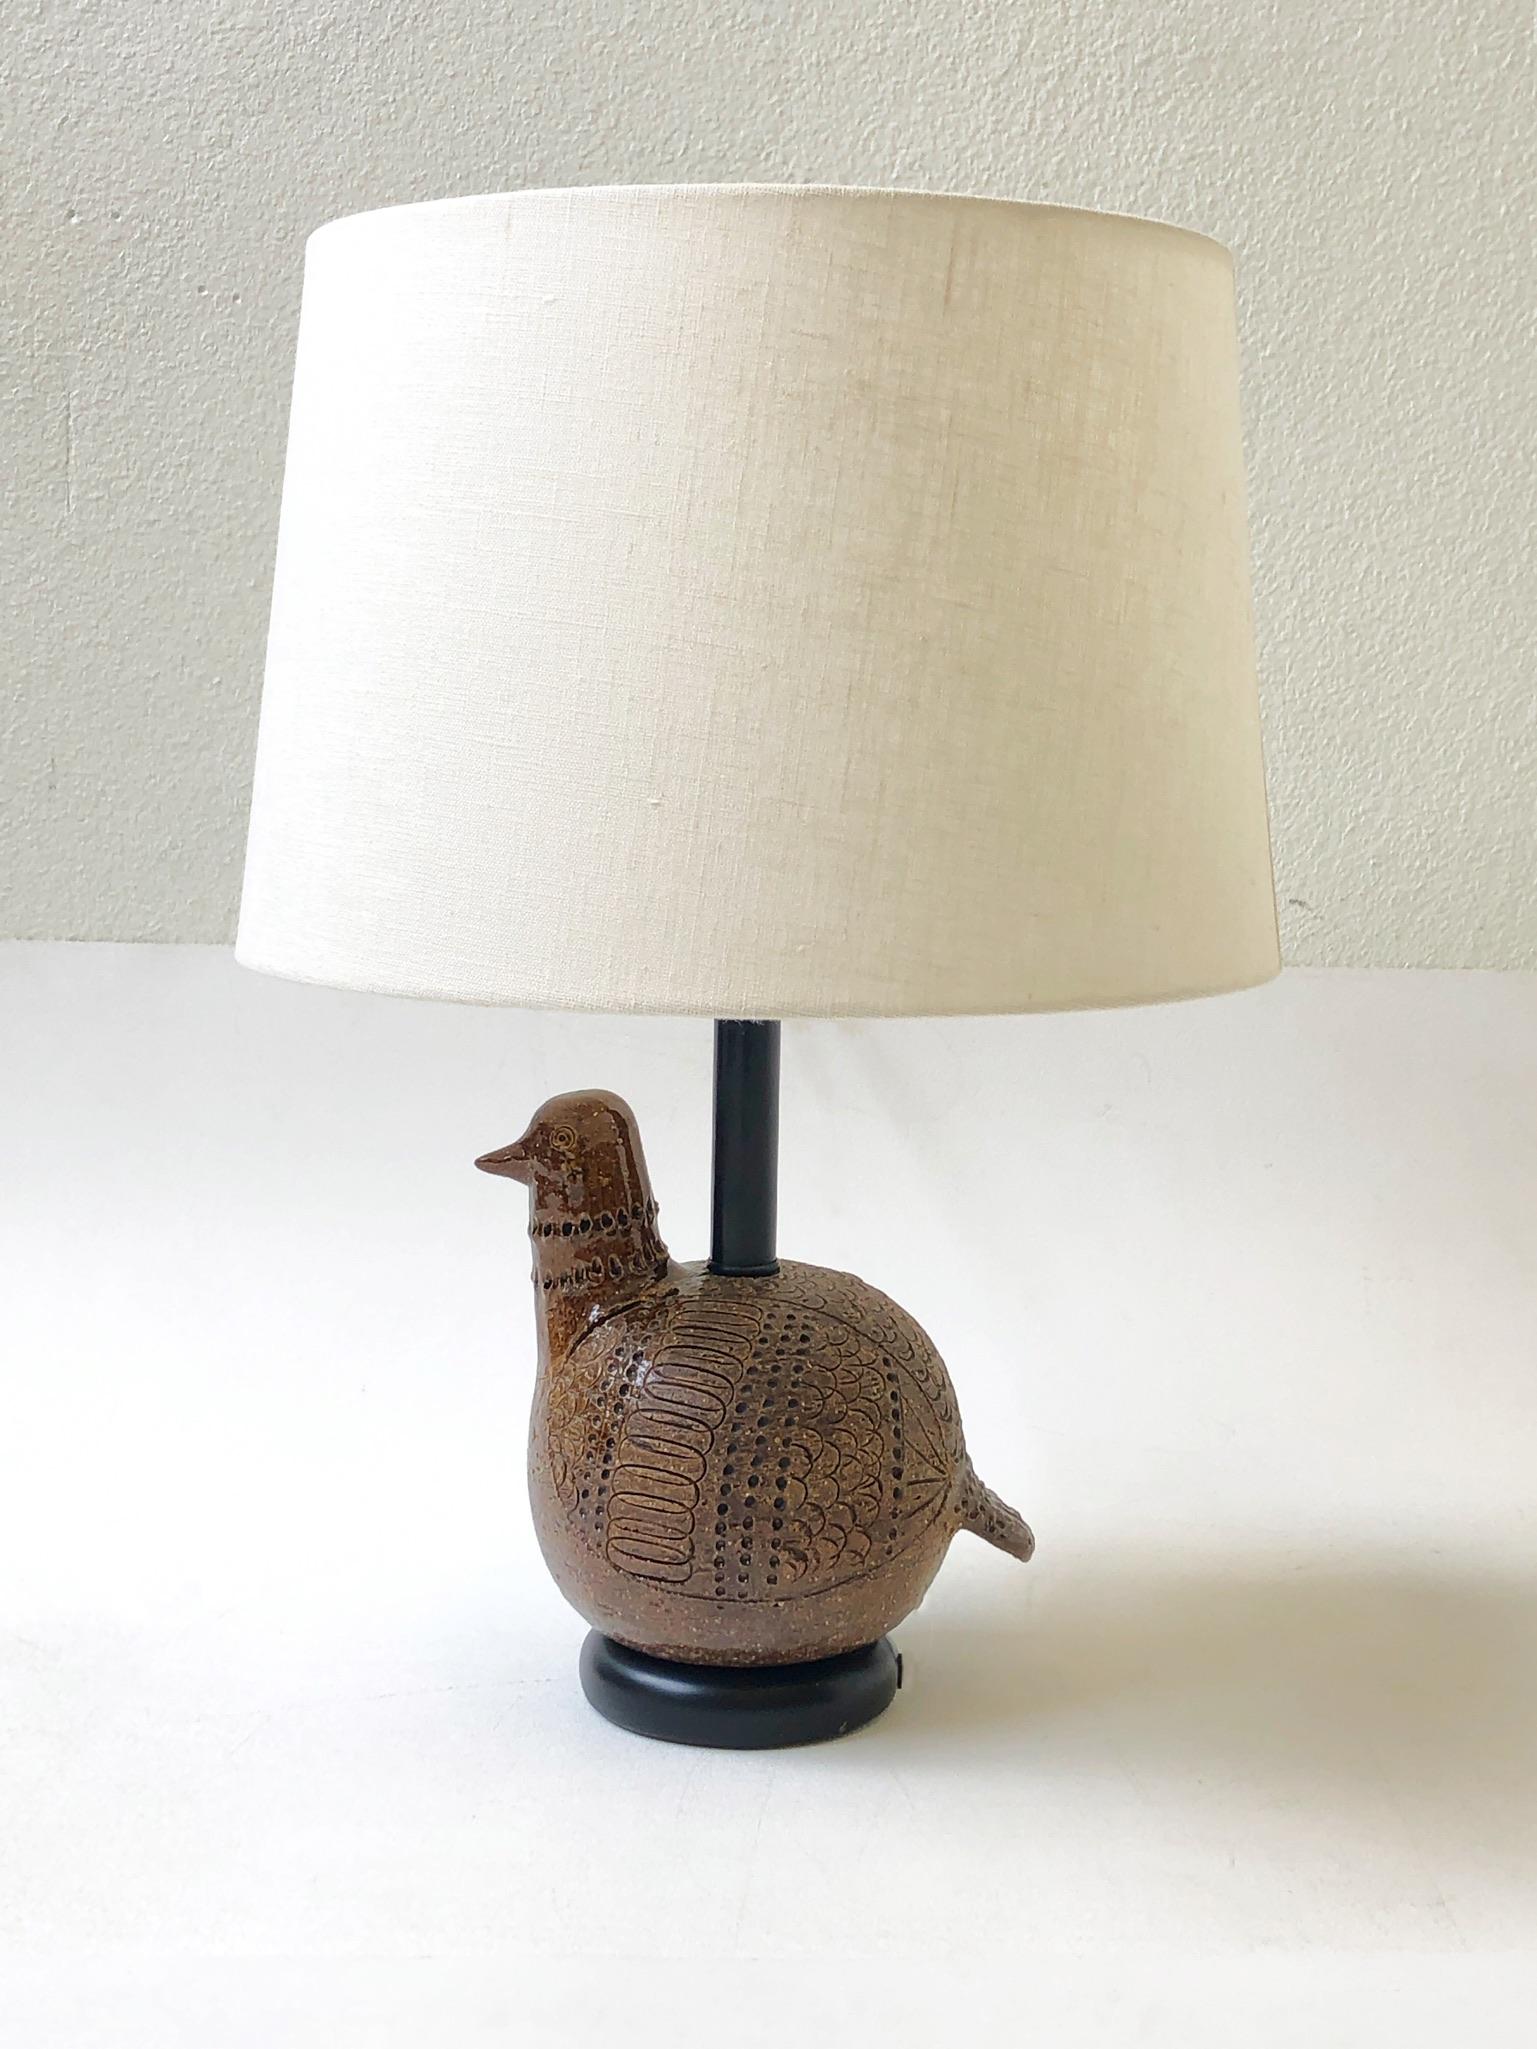 A charming Italian brown ceramic bird table lamp by Bitossi. The lamp was designed in the 1960s. The ceramic bird shows where the head was joined to the body (it’s not a cracked). Constructed of brown glazed ceramic with black lacquered and brass